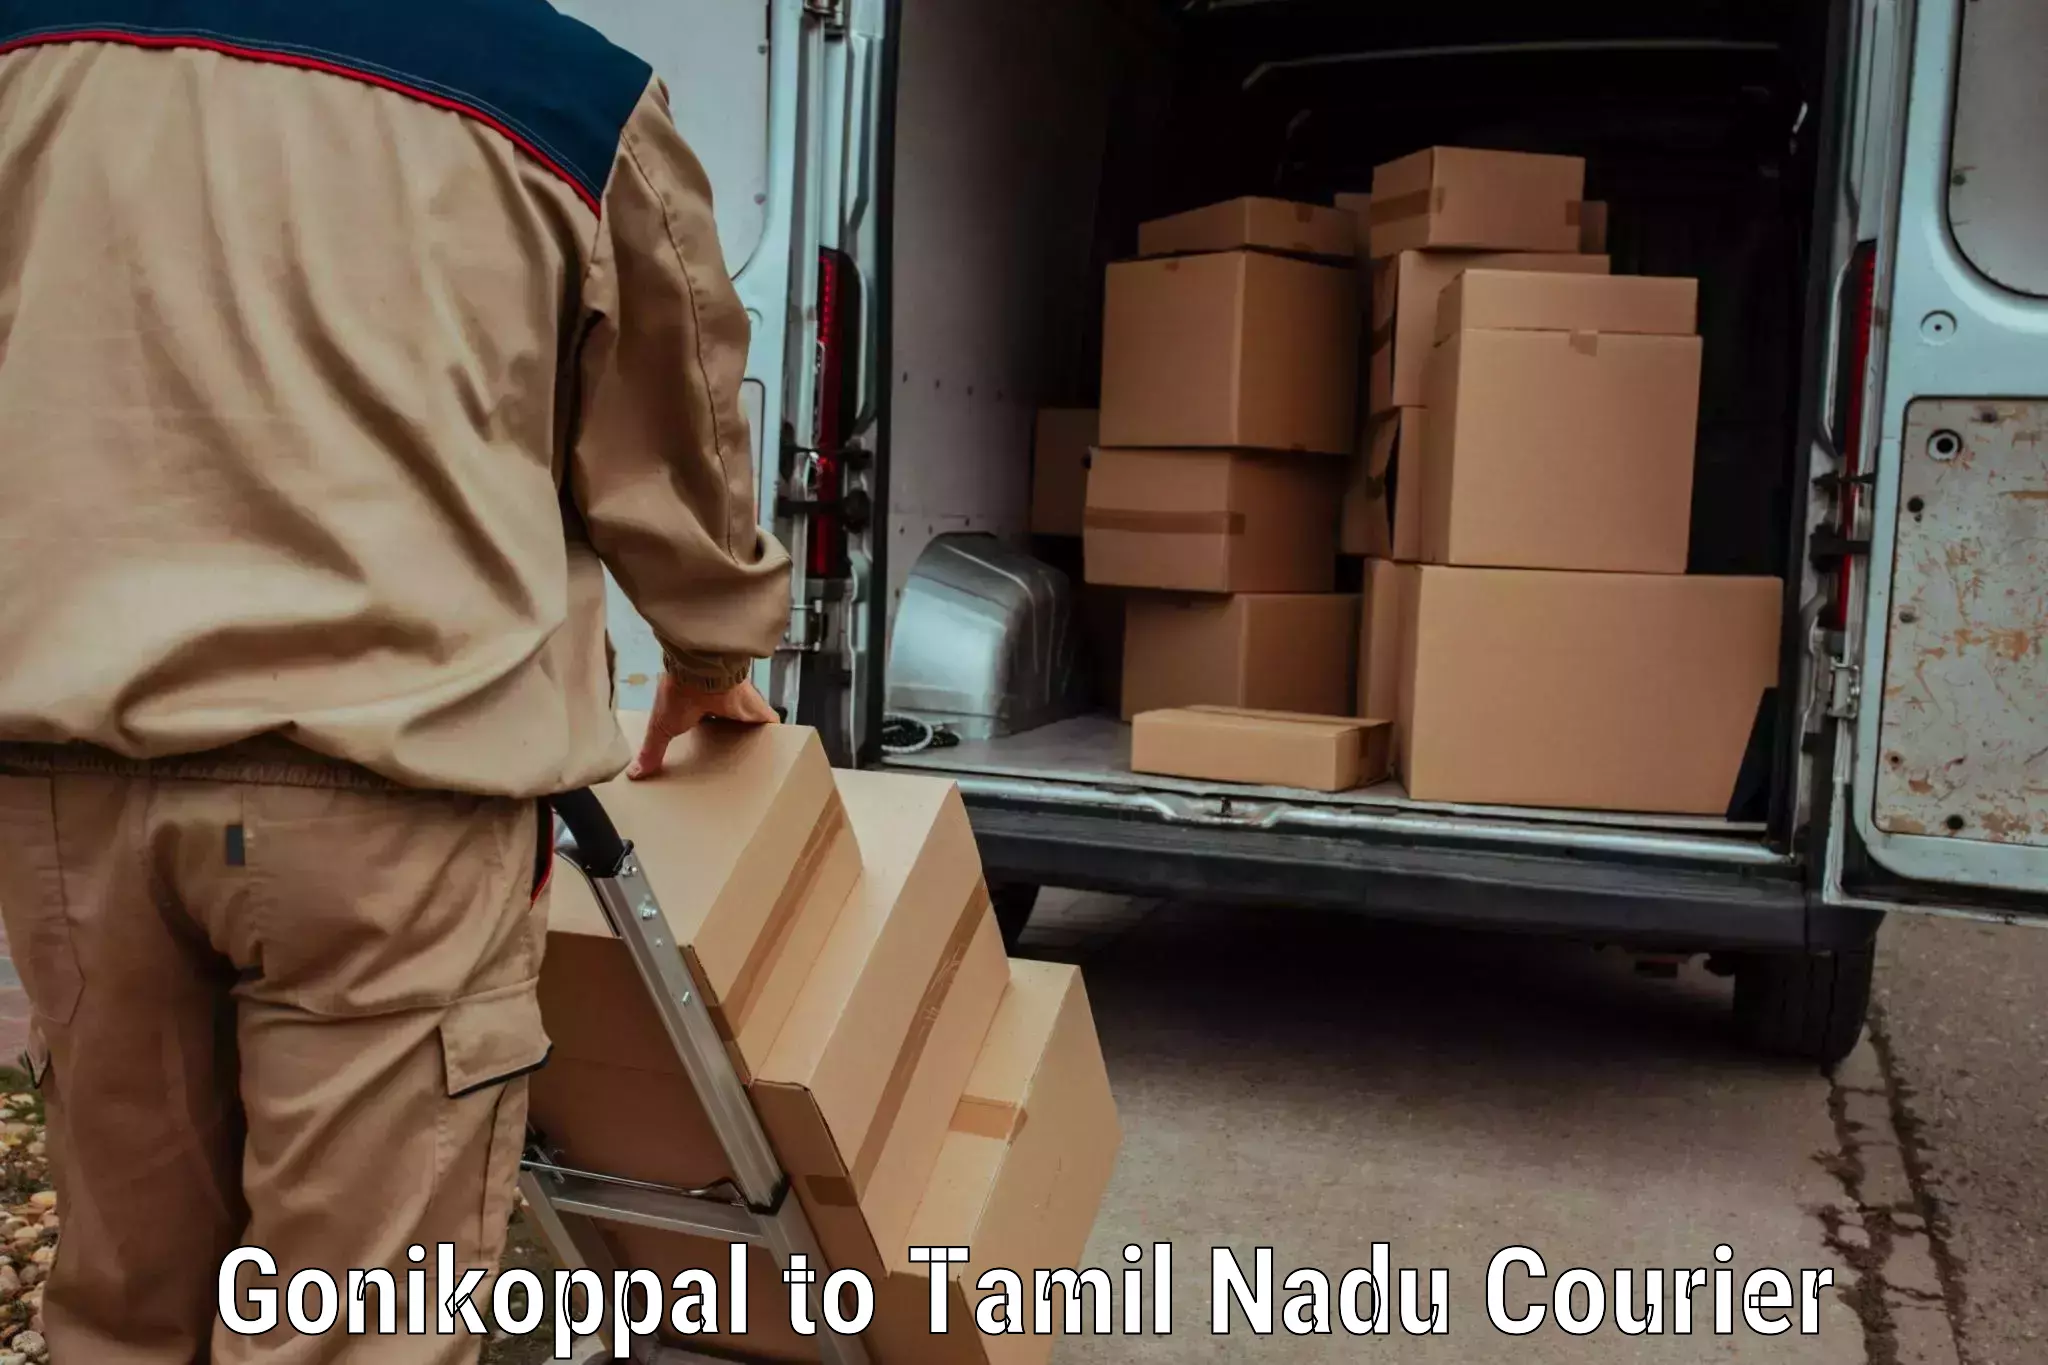 Sustainable shipping practices Gonikoppal to Melmaruvathur